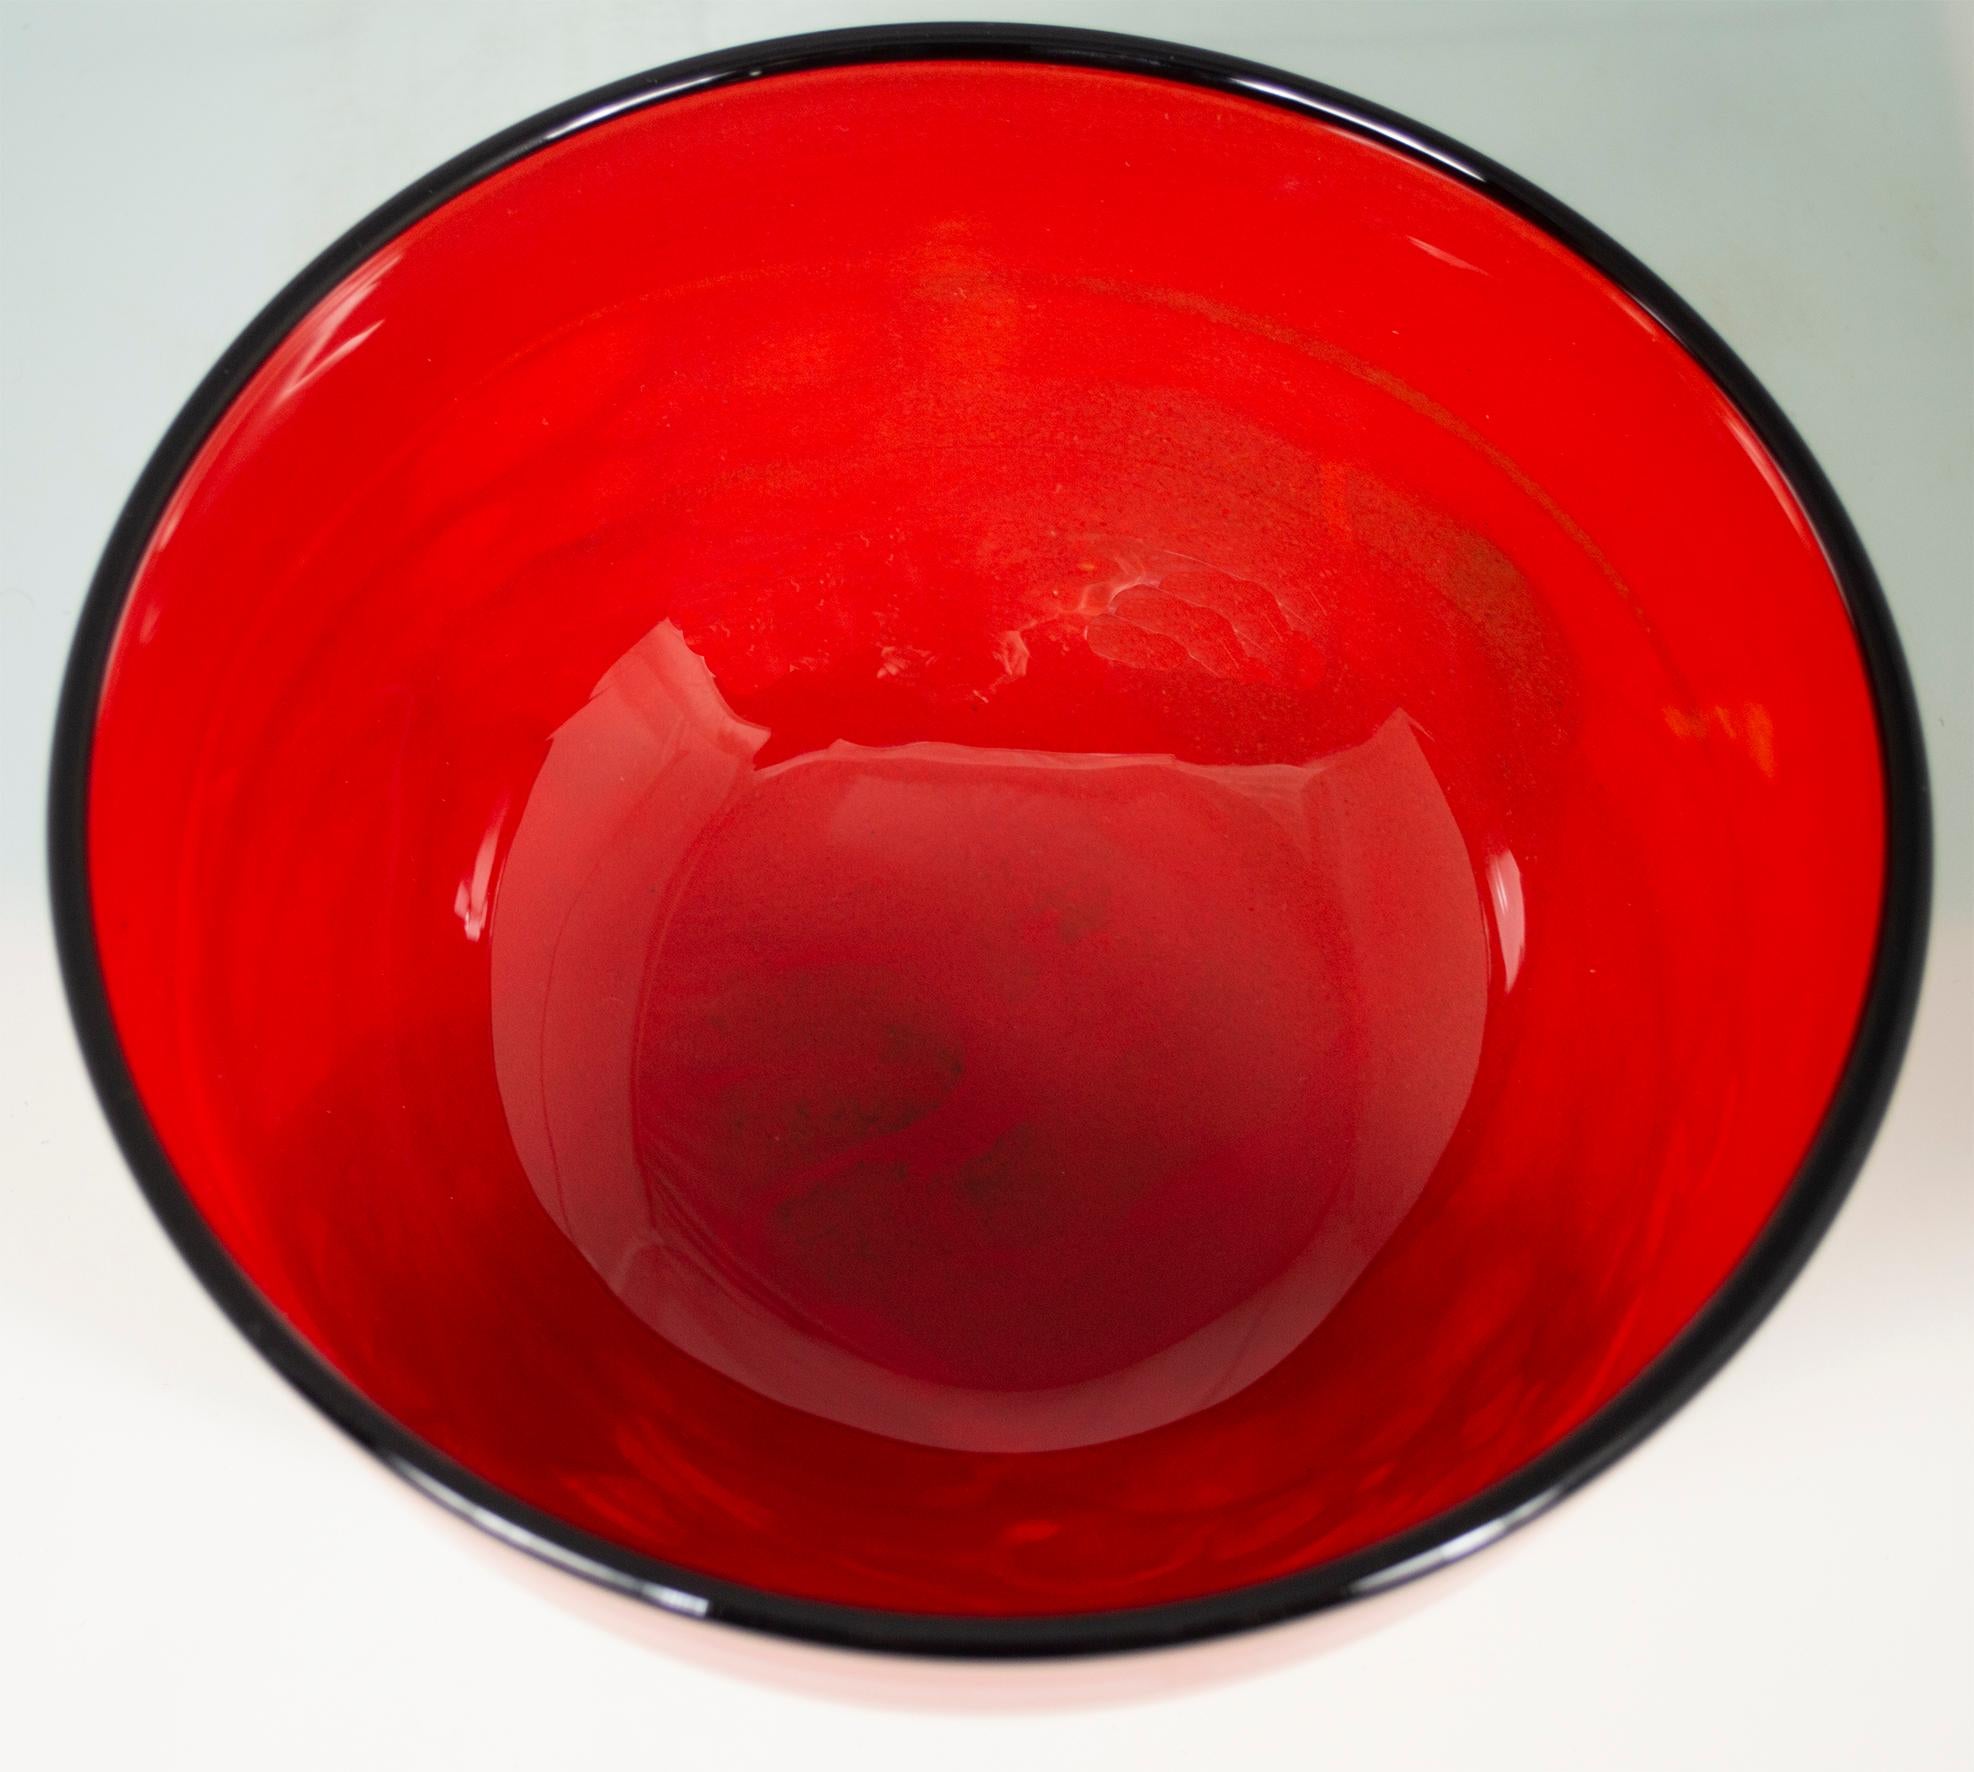 Drawing inspiration from the gestural composition techniques of Abstract Expressionism, Ioan Nemtoi's 'Red Bowl' features a brilliant array of colors that seem to shift before the observer's very eyes. Because all of his pieces are hand-blown, no